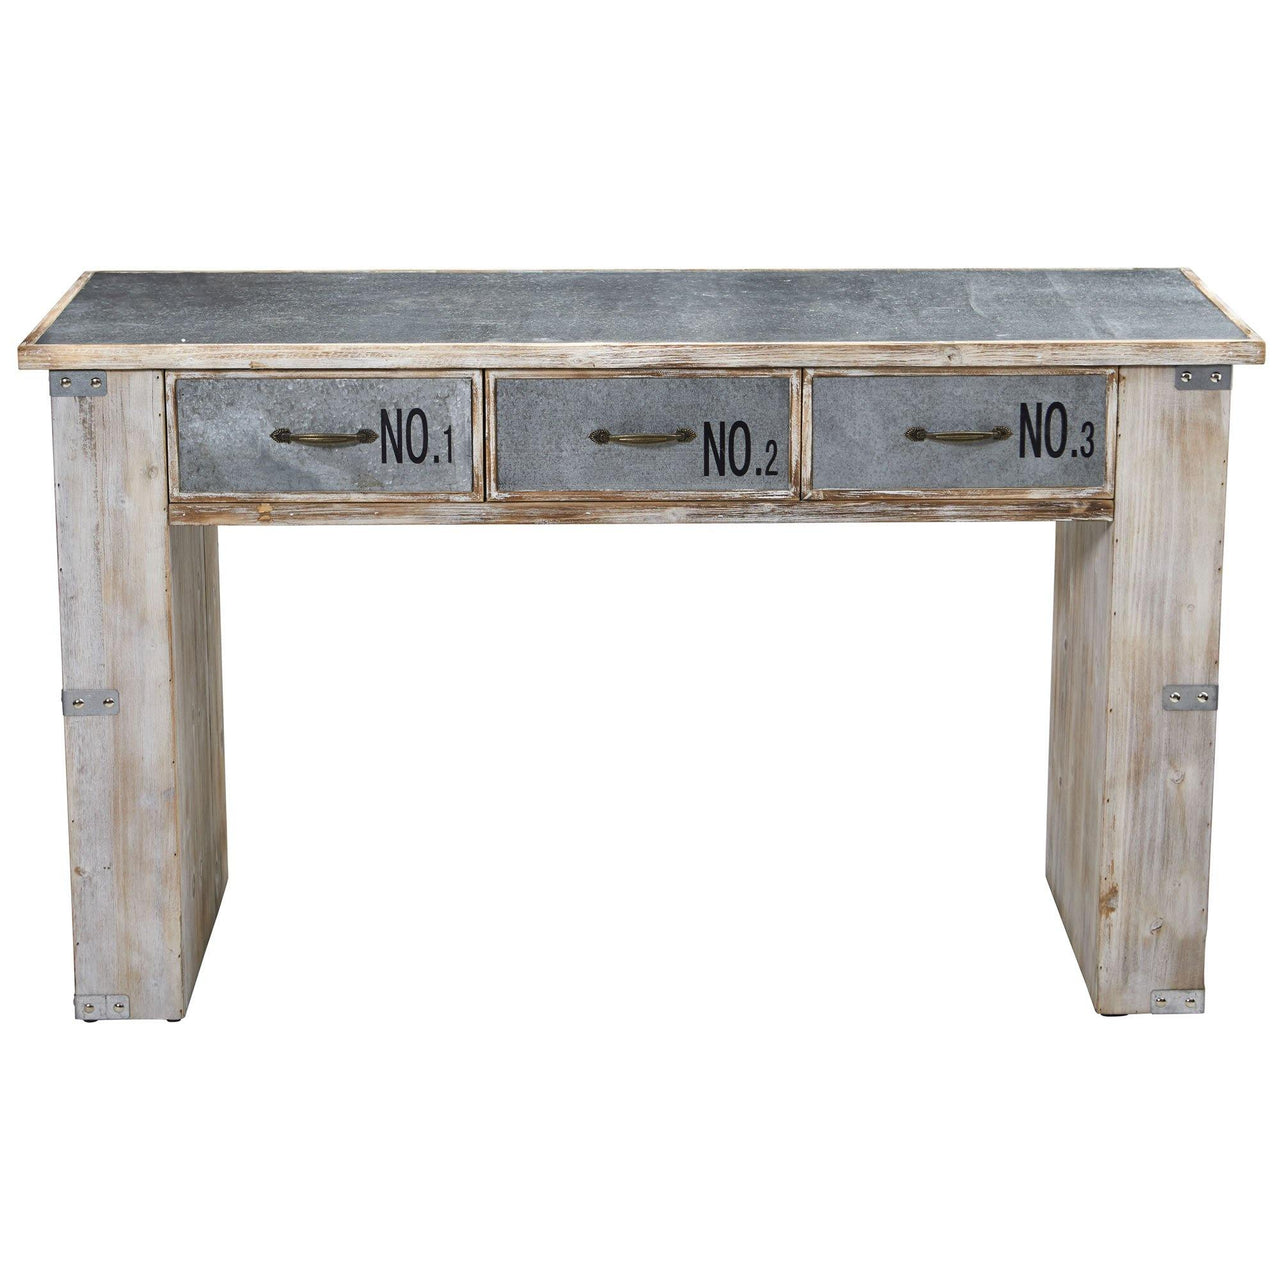 32” Industrial White Wash Wood And Metal Desk - The Fox Decor